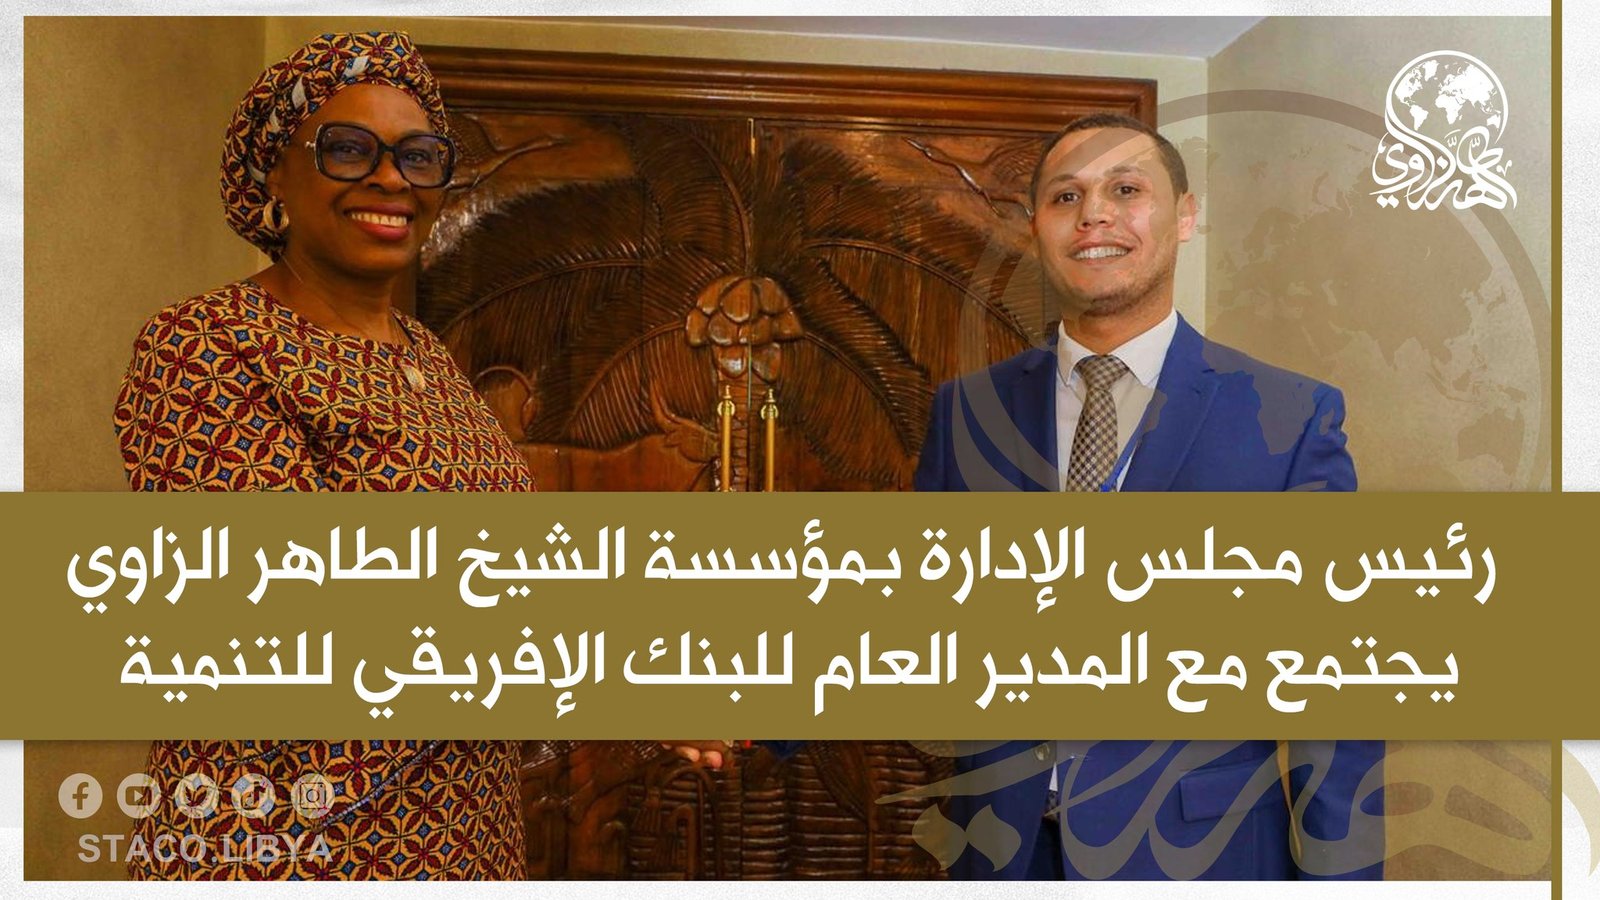 The Chairman of the Board of Directors of The Sheikh Tahir Al-Zzawi organization meets with the Director-General of the African Development Bank